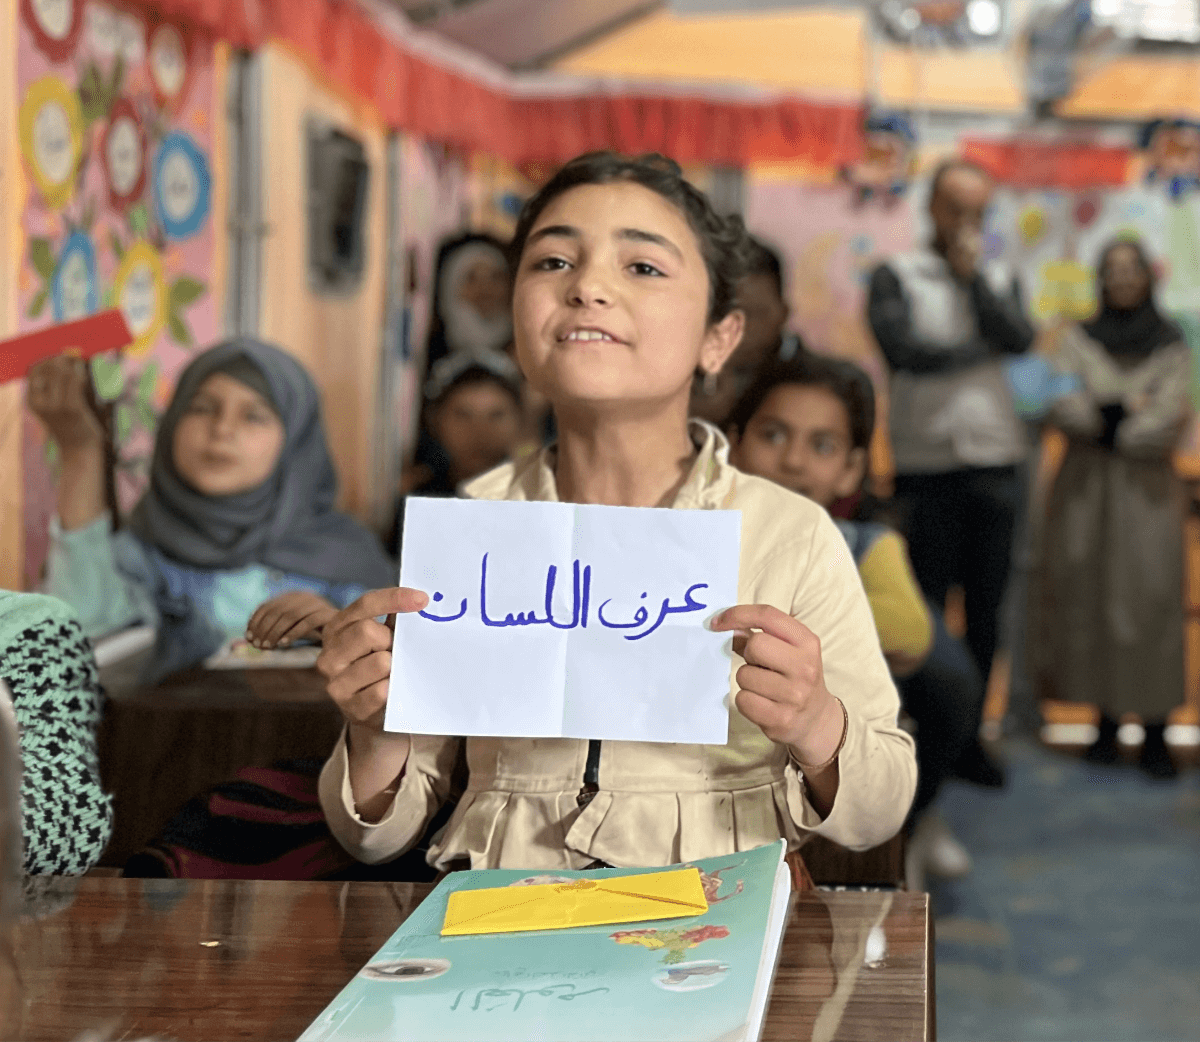 A studnent in her classroomo holding up a piece of paper with Arabic words written on it